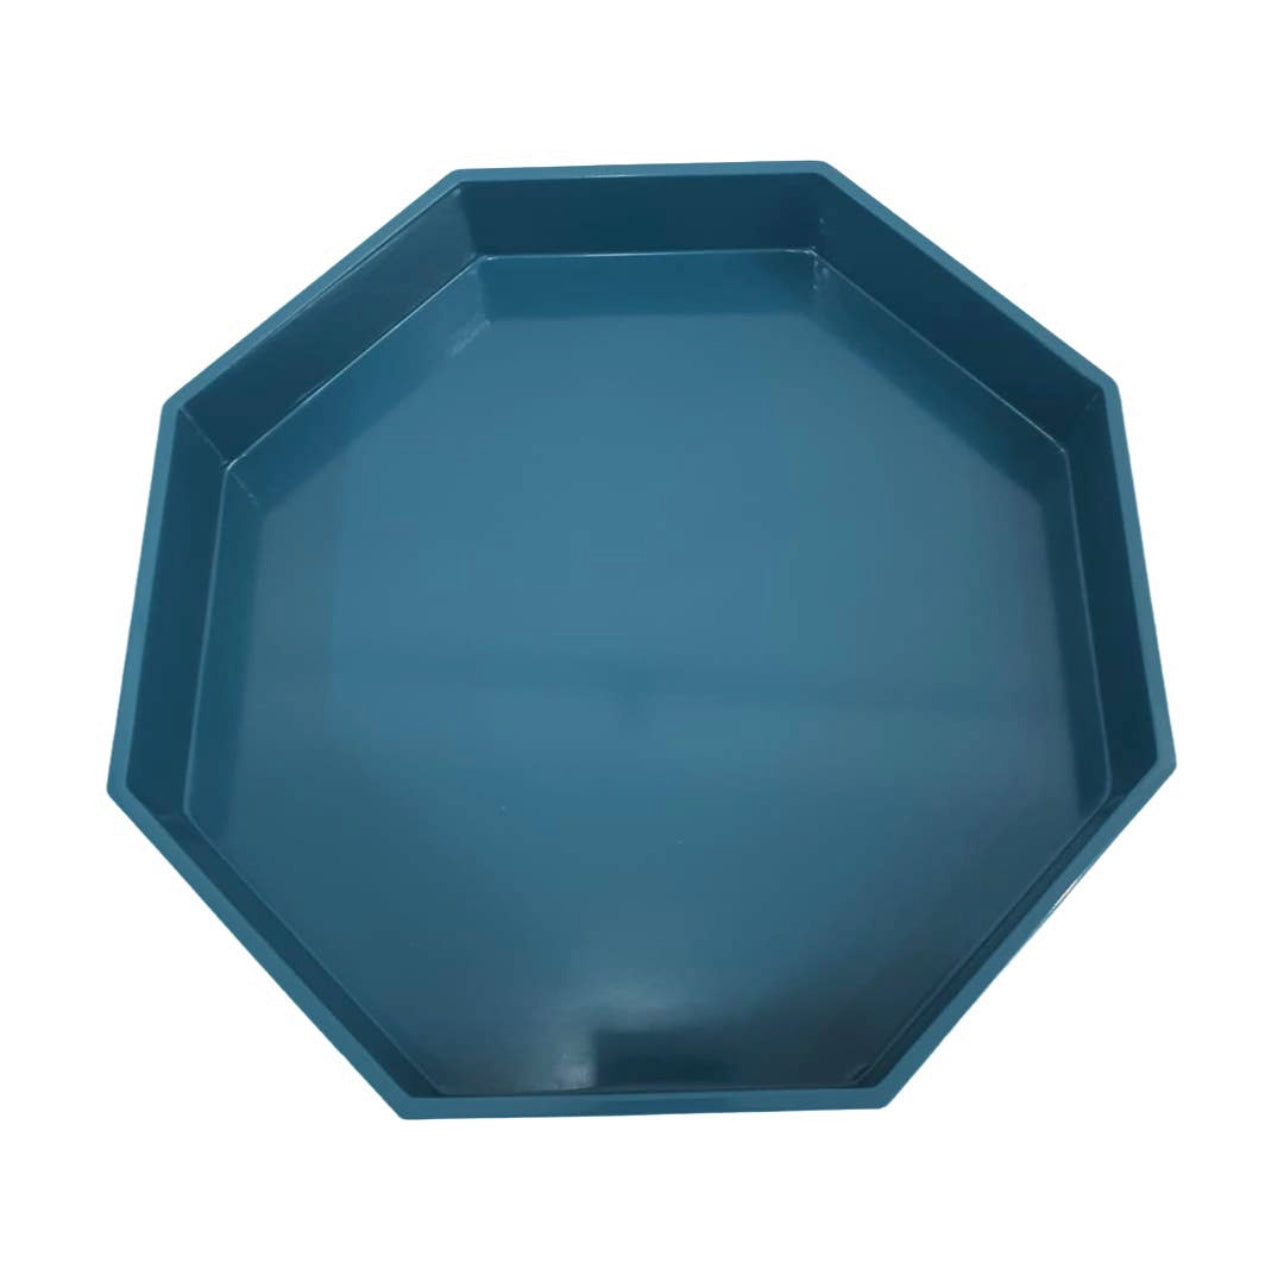 Large Octagonal Lacquer Tray, Prussian